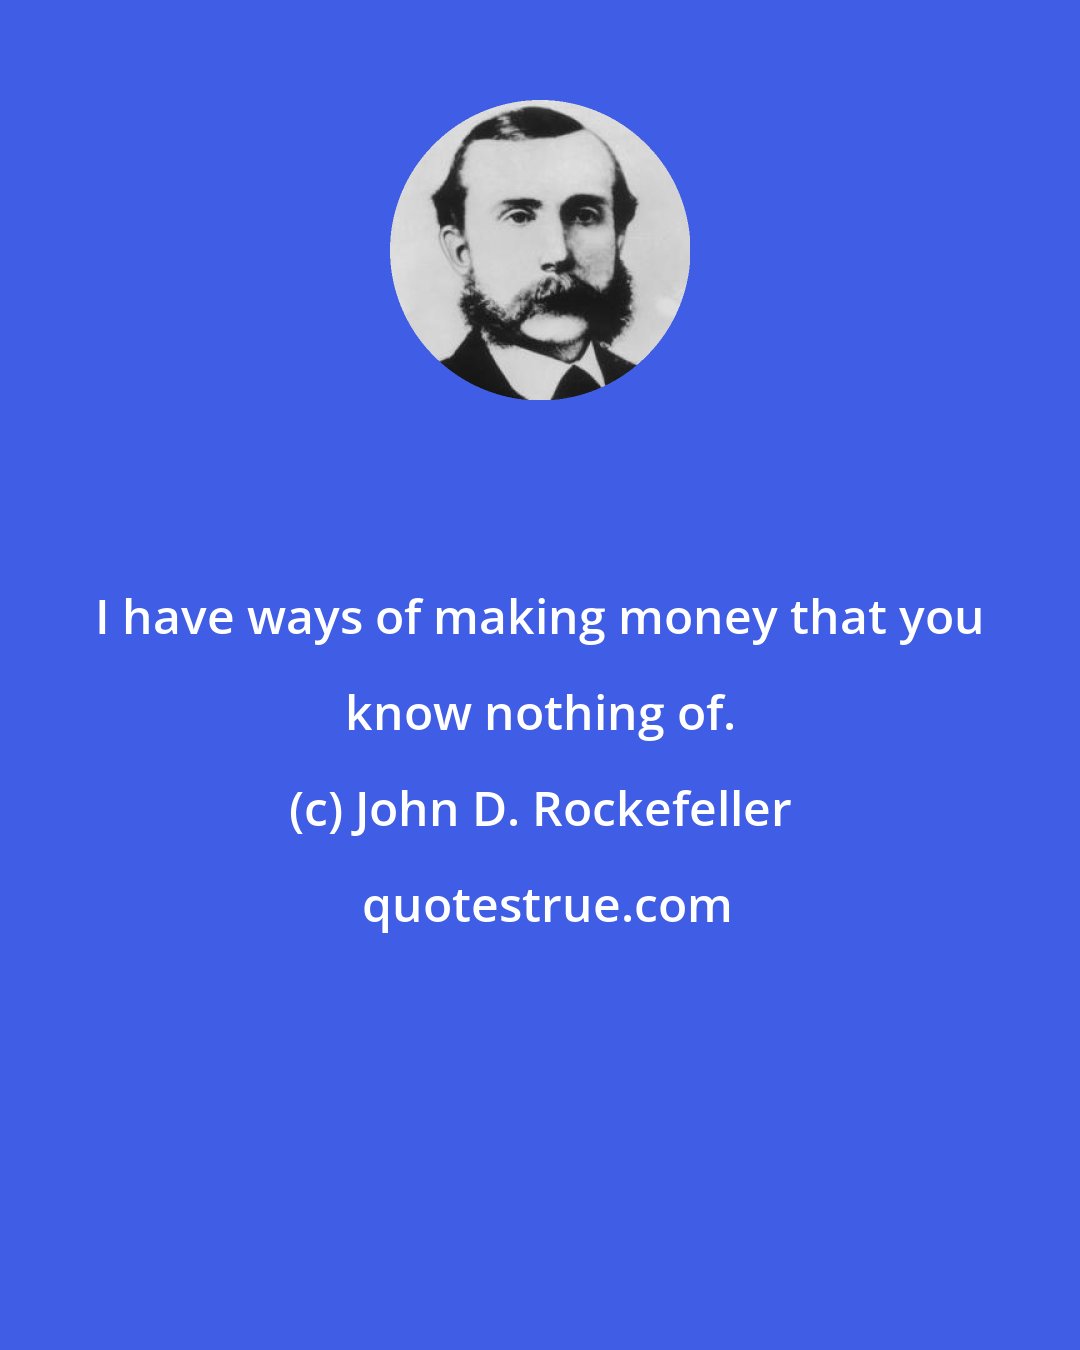 John D. Rockefeller: I have ways of making money that you know nothing of.